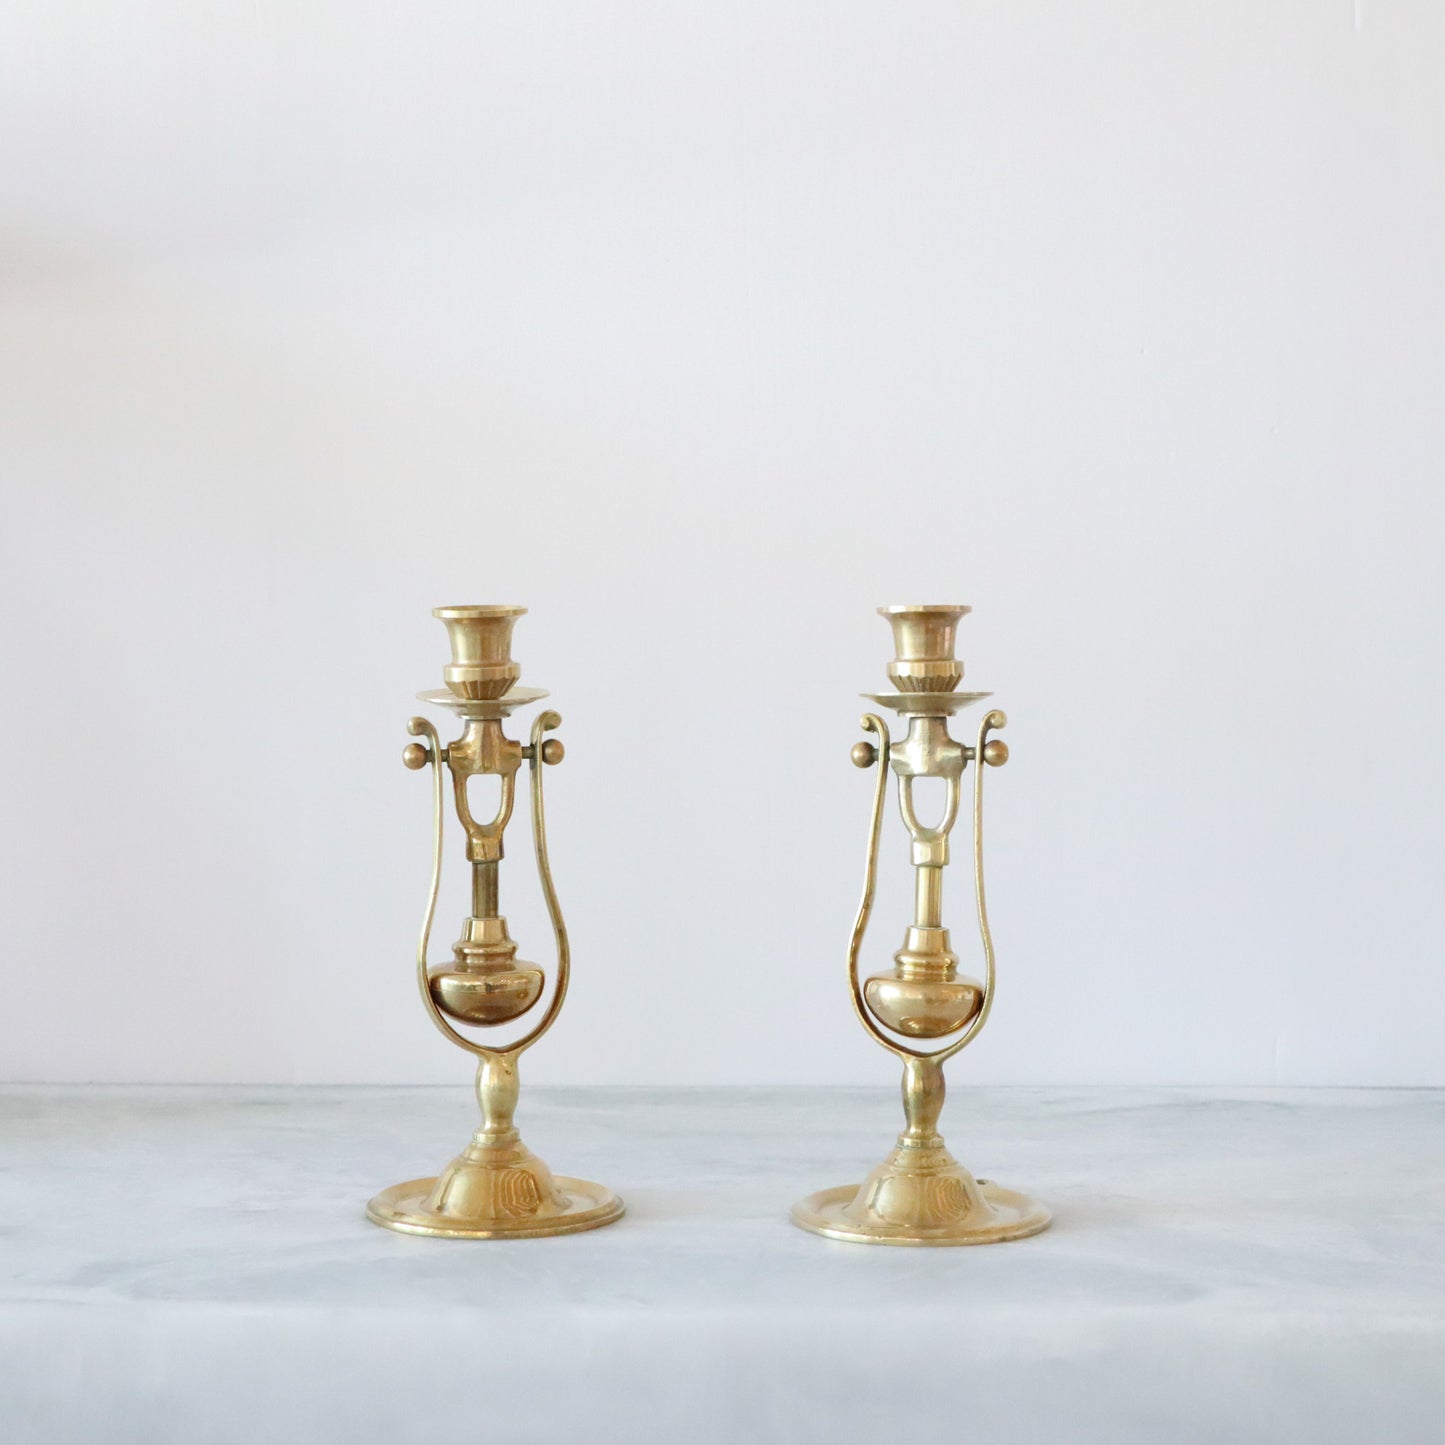 Pair of Antique Weighted Candle Holders